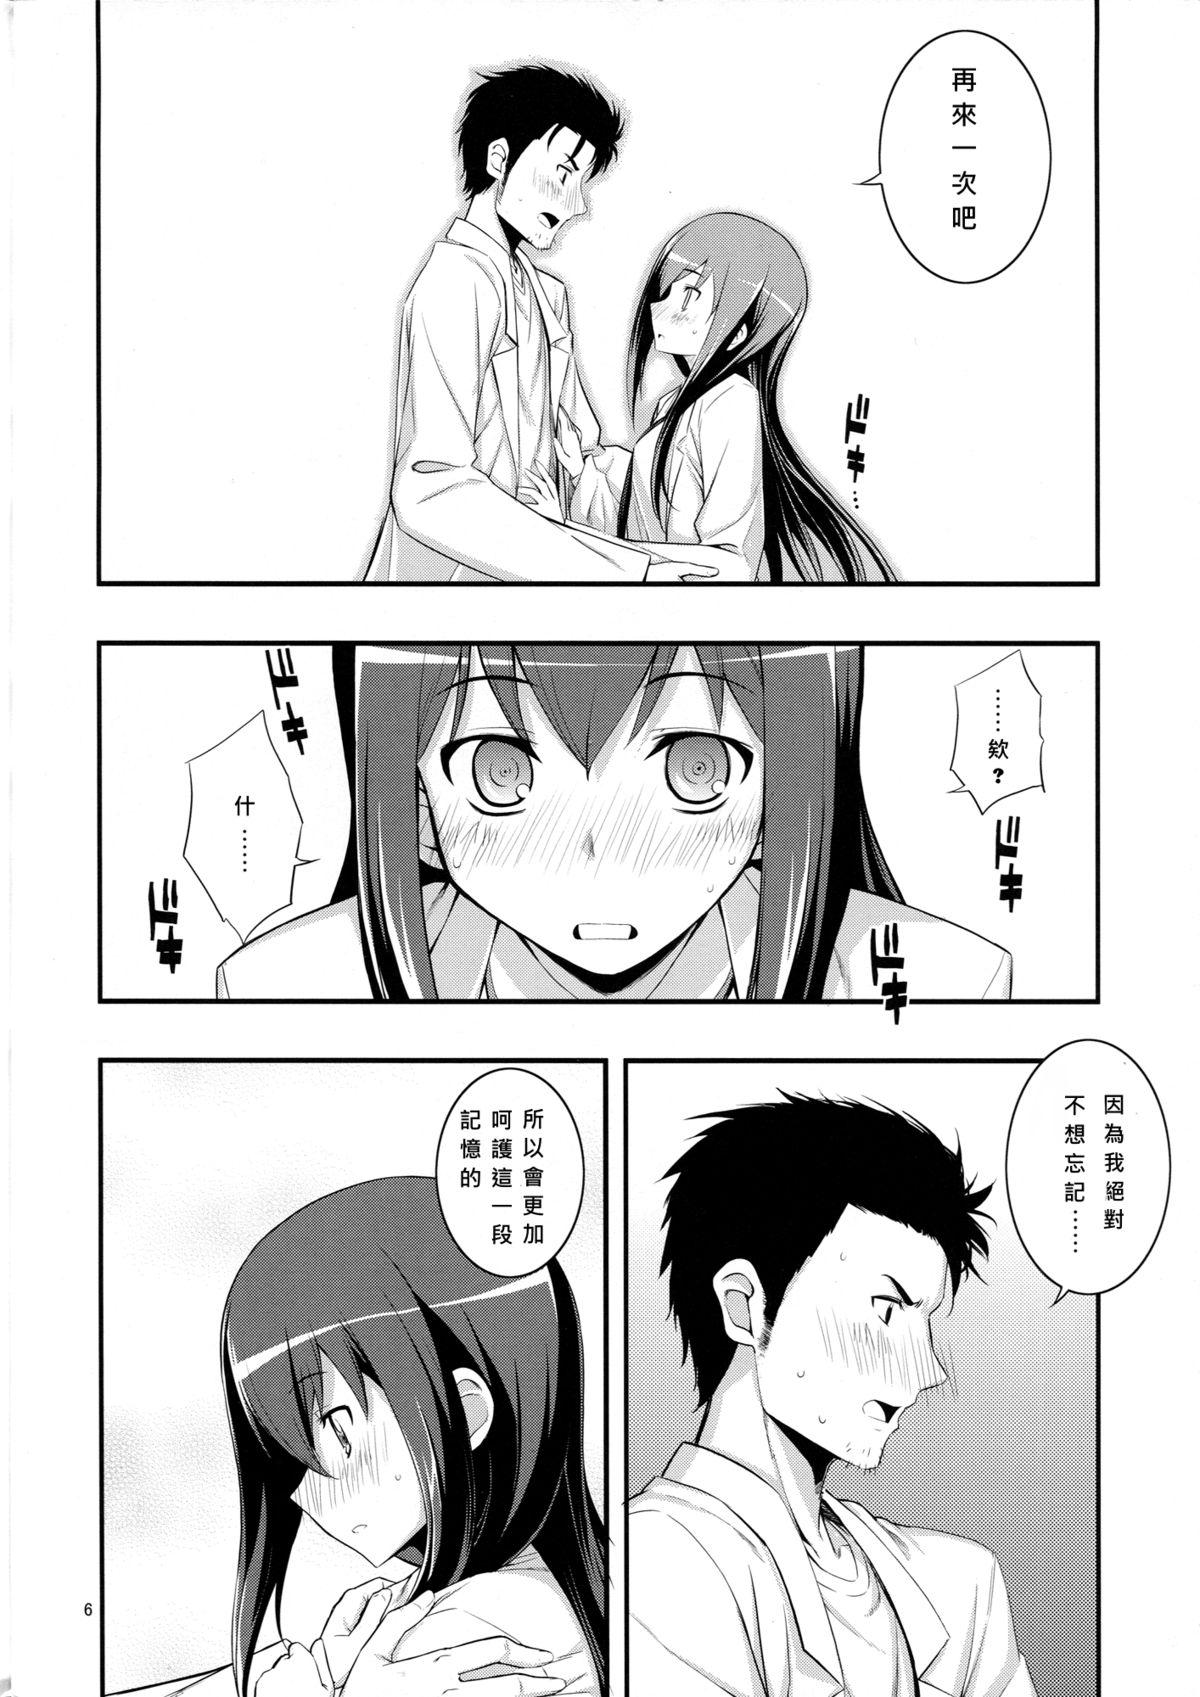 ...RE 14 Page 6 Of 31 steinsgate hentai comic, RE 14 Page 6 Of 31 steinsgat...